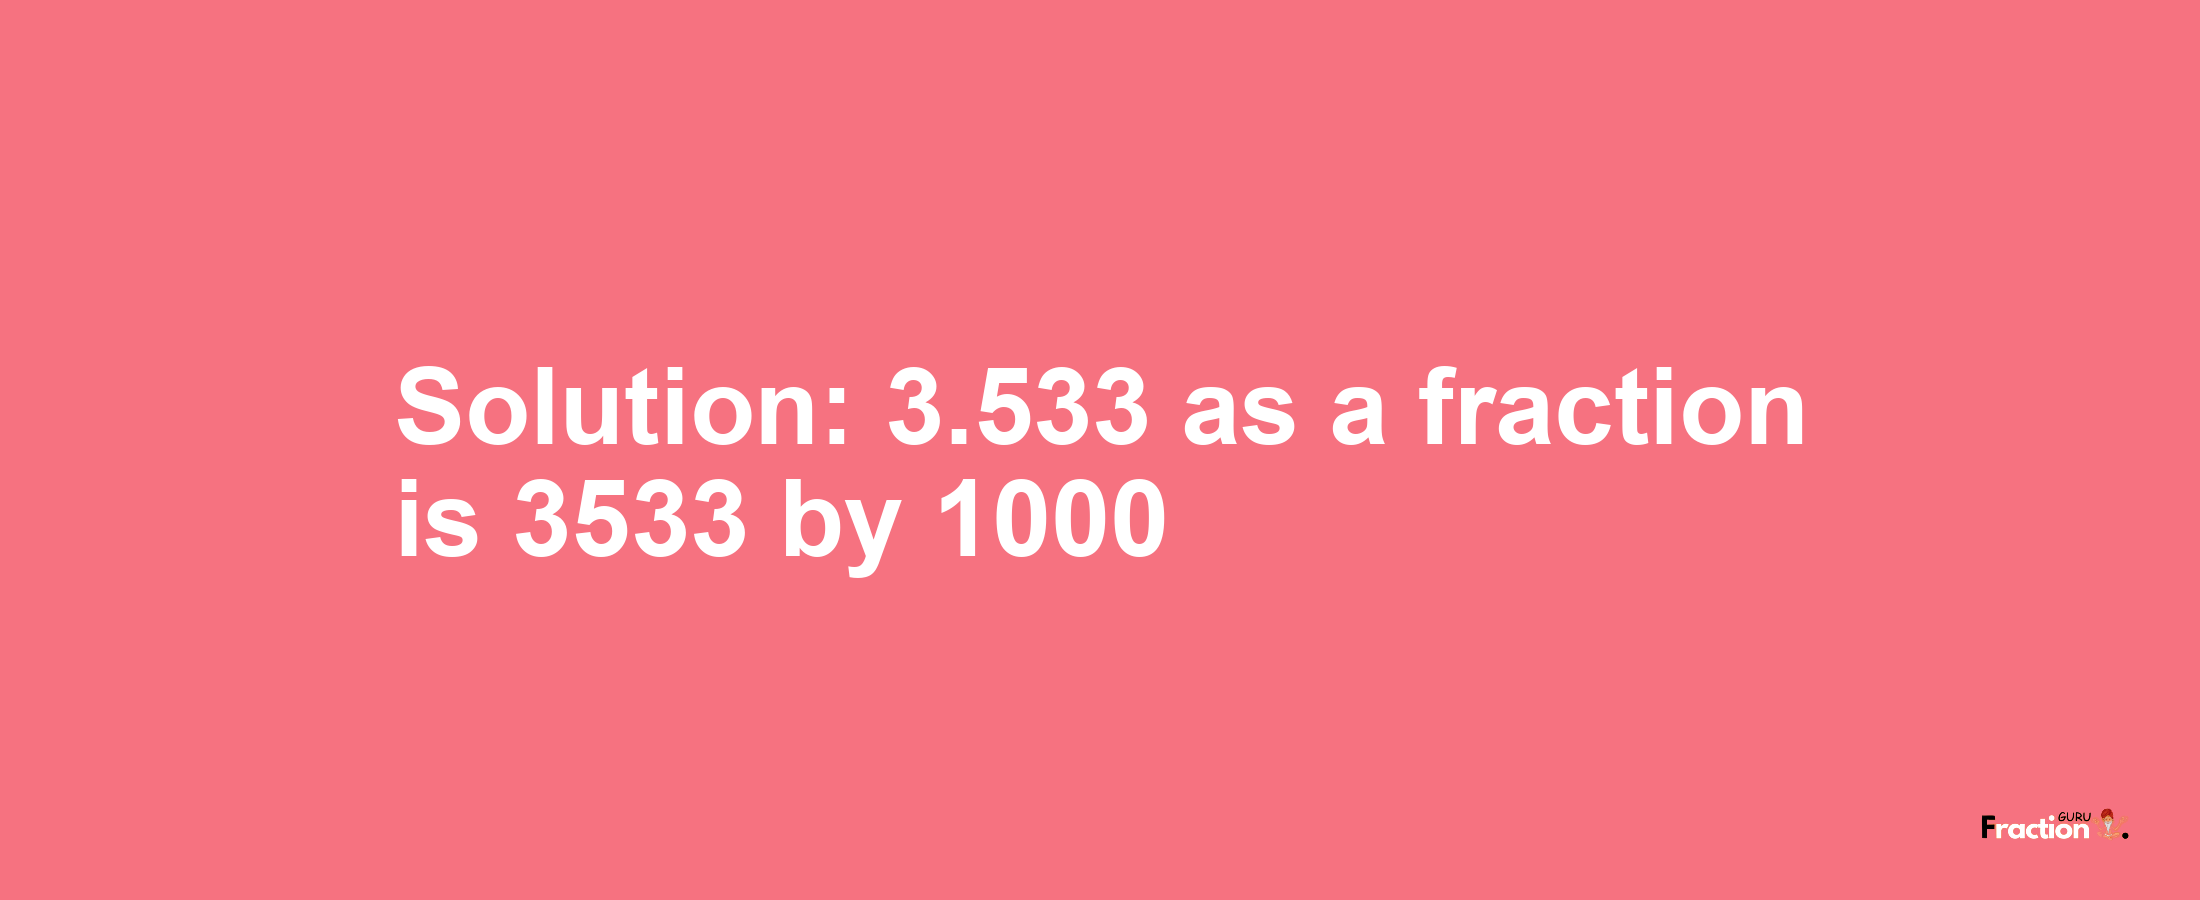 Solution:3.533 as a fraction is 3533/1000